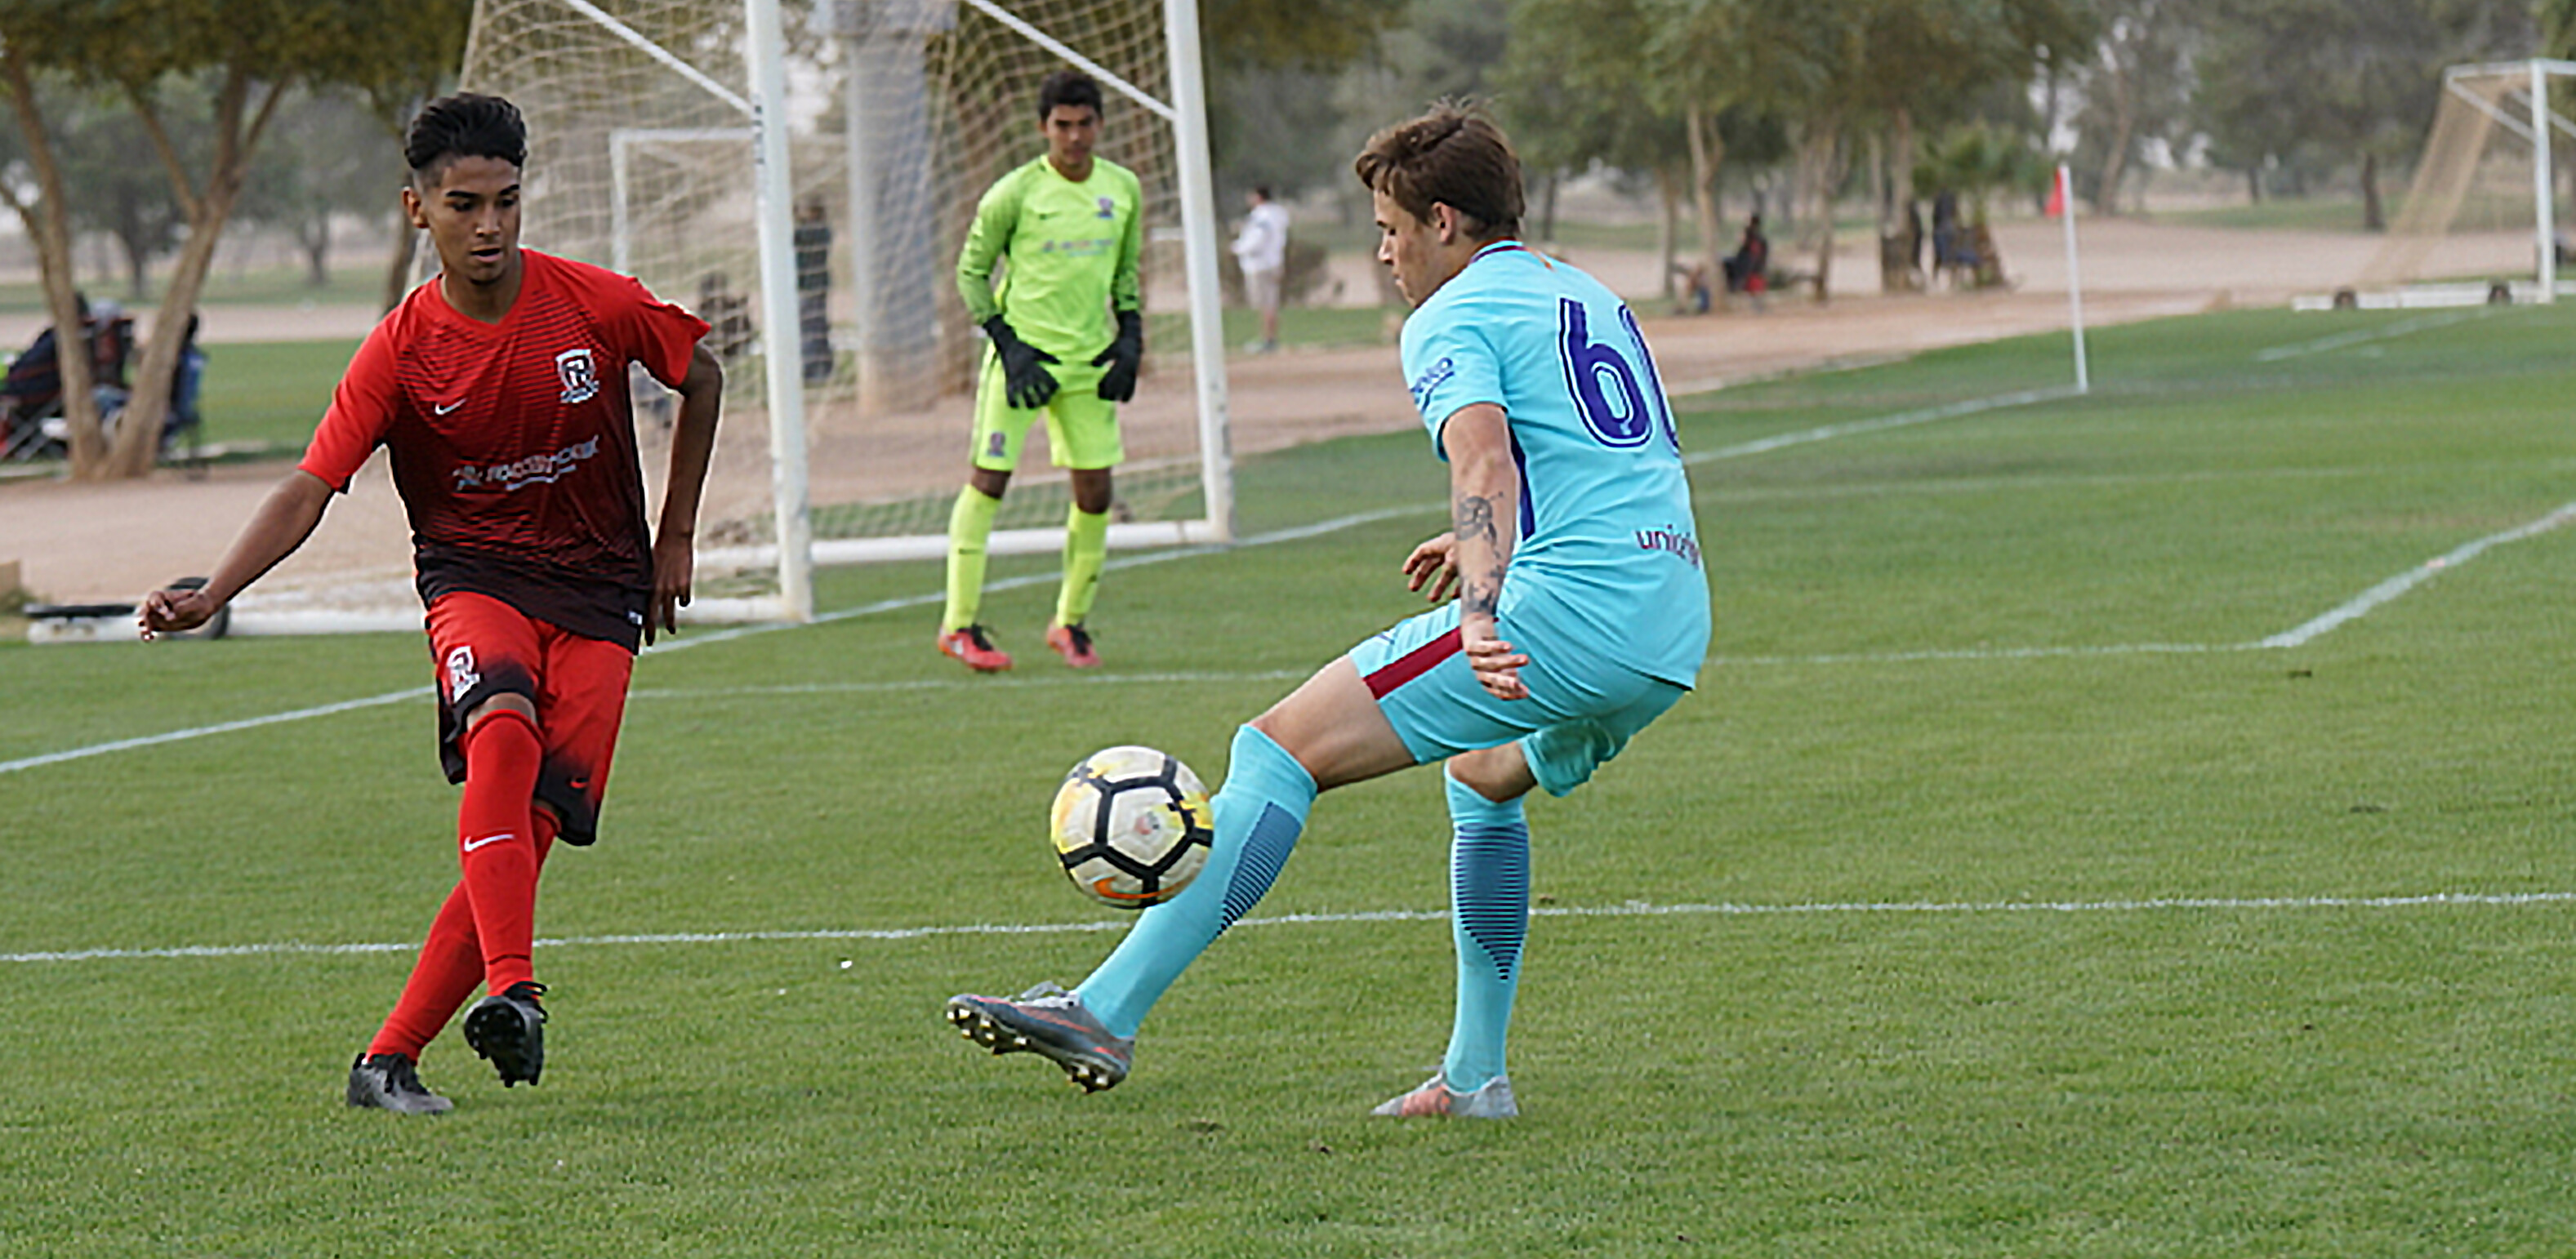 Barça Academy soccer player, Jake LaCava, attempts to bypass defender for a shot on goal.